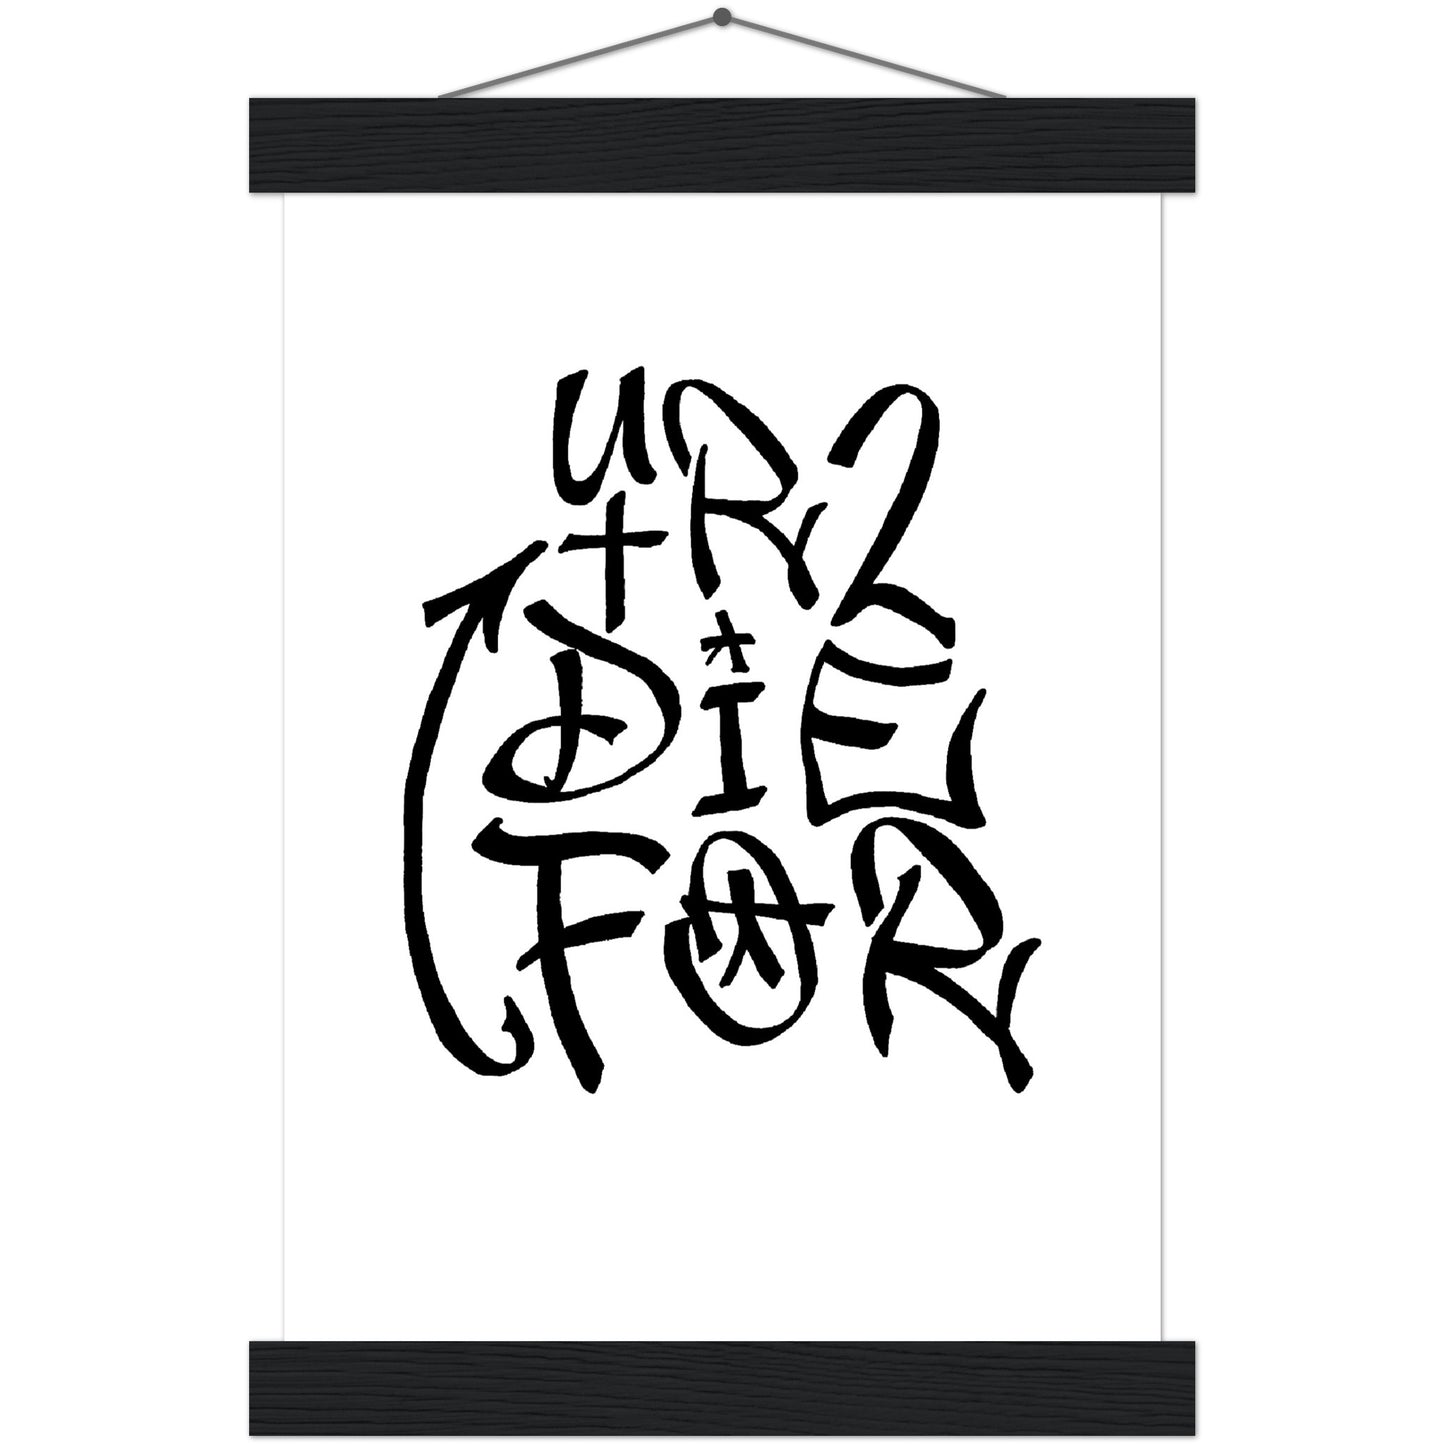 UR2DieFor - A4 Premium Semi-Glossy Paper Poster with Hanger